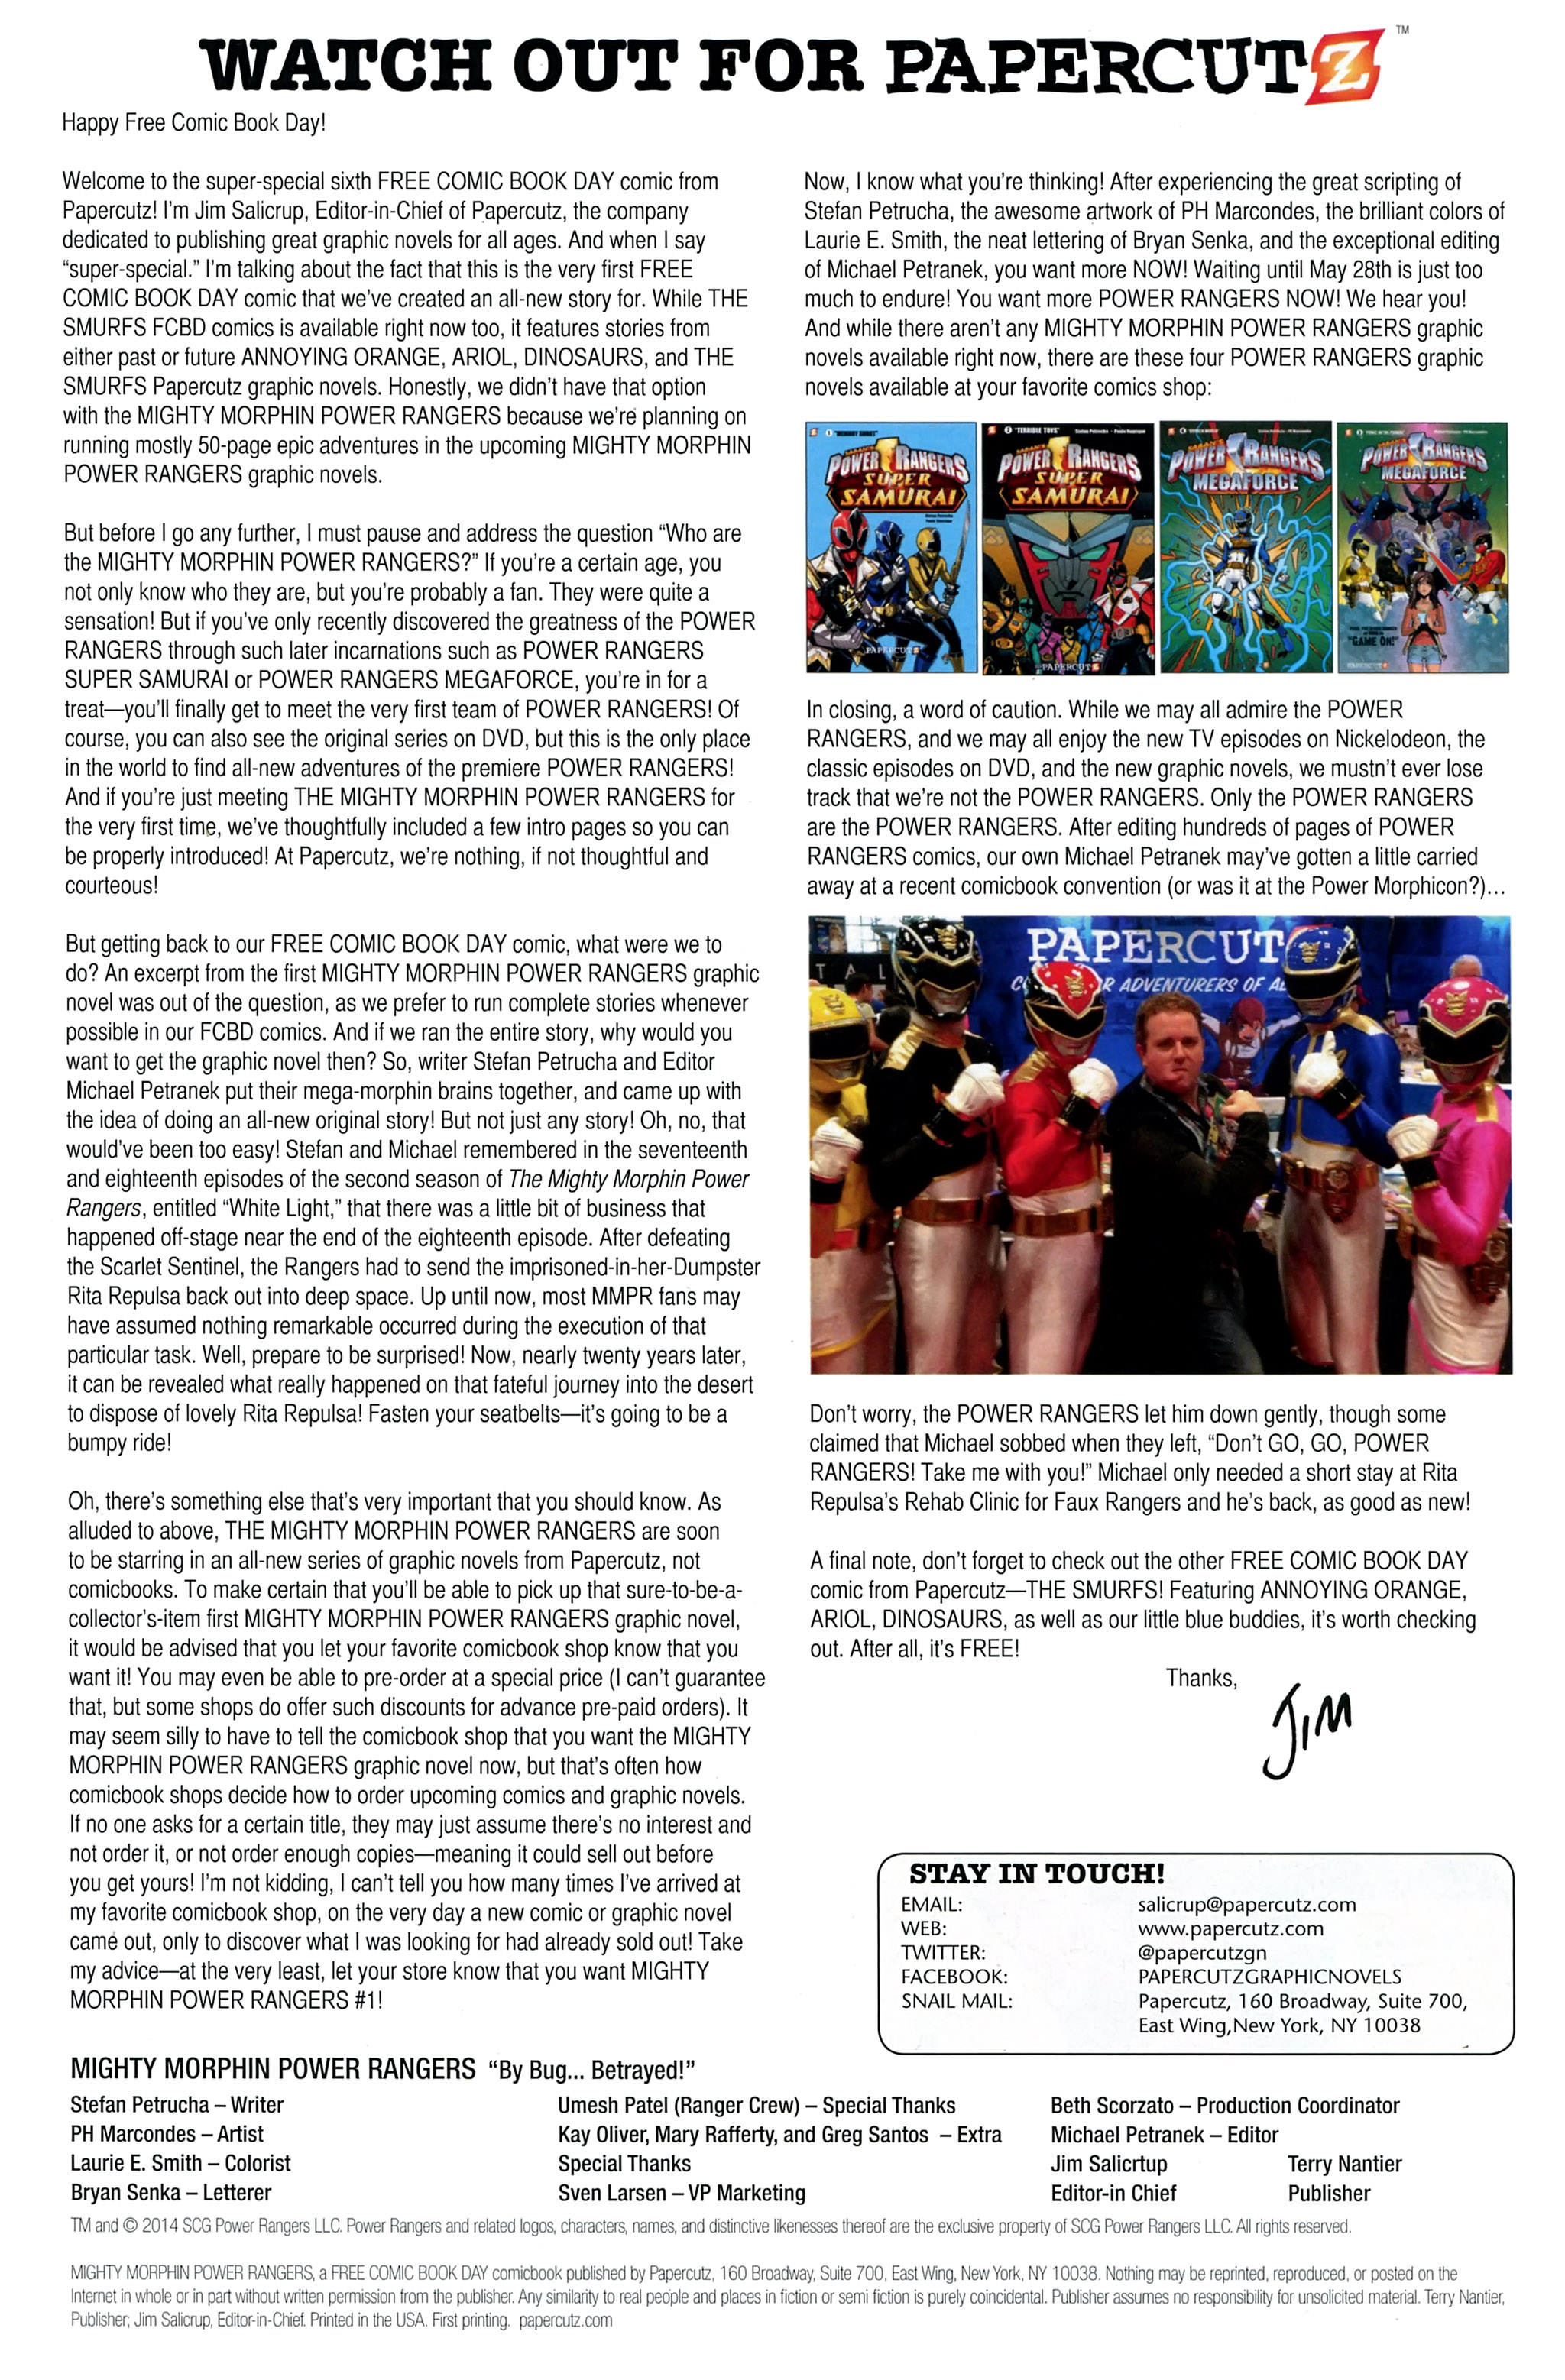 Read online Free Comic Book Day 2014 comic -  Issue # Mighty Morphin Power Rangers - 2